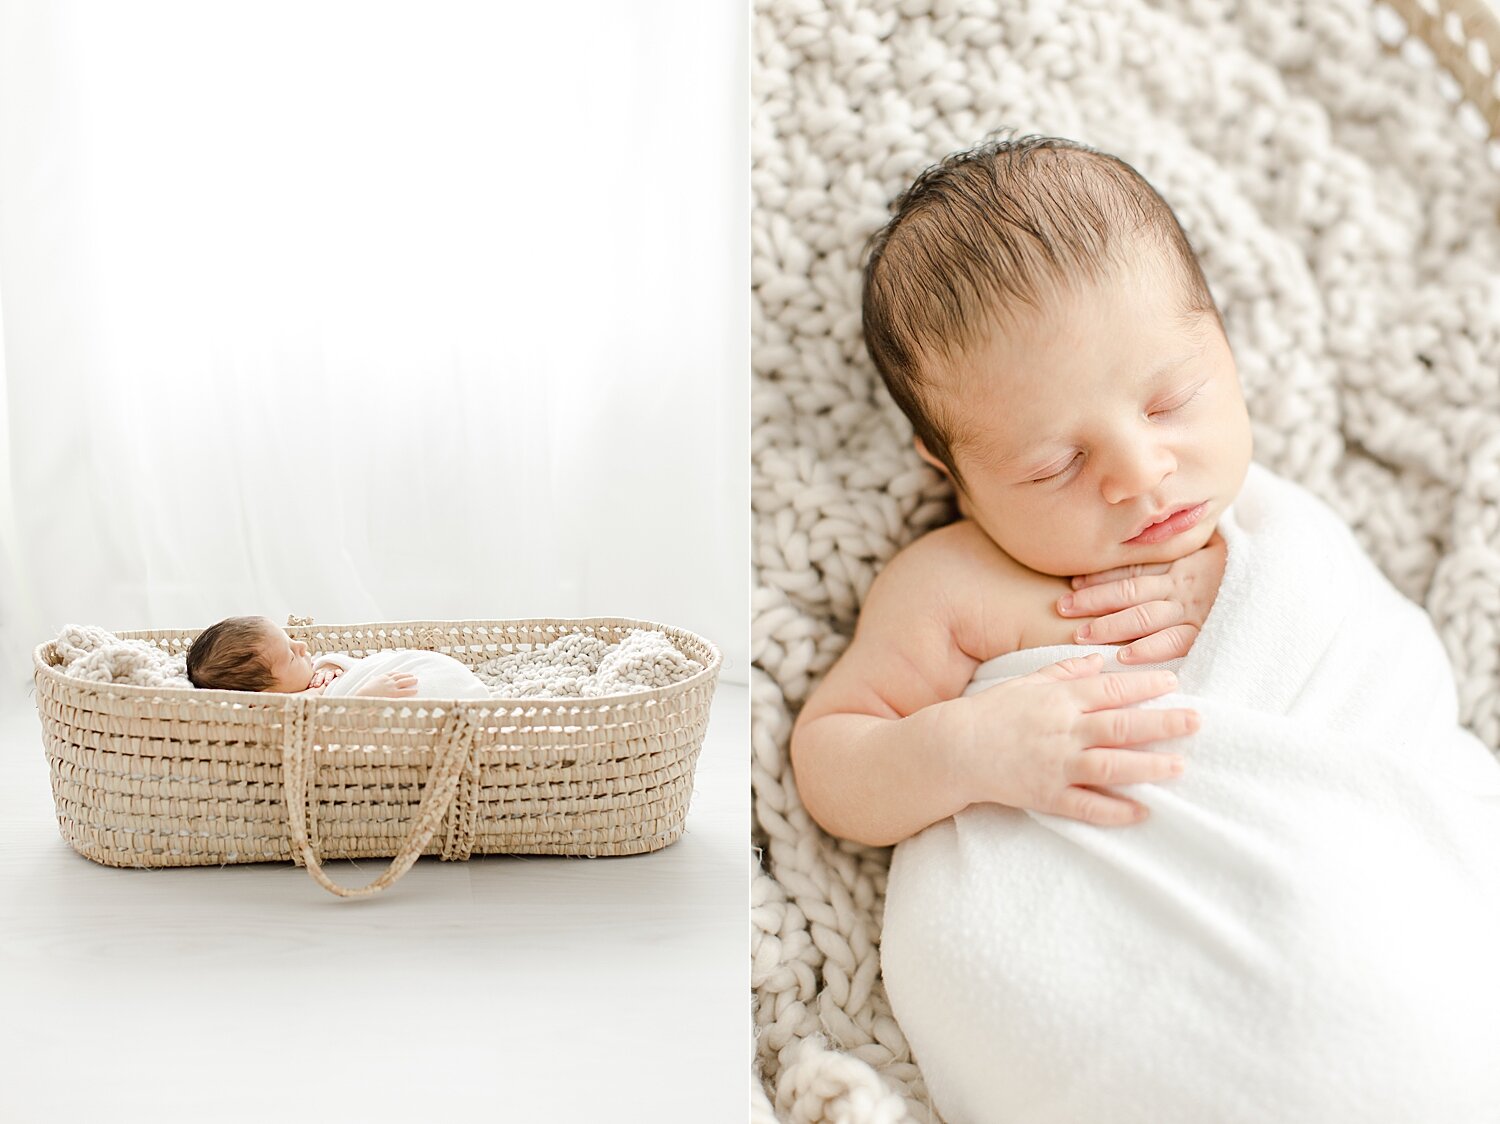 Newborn in Moses basket. Photo by Kristin Wood Photography.